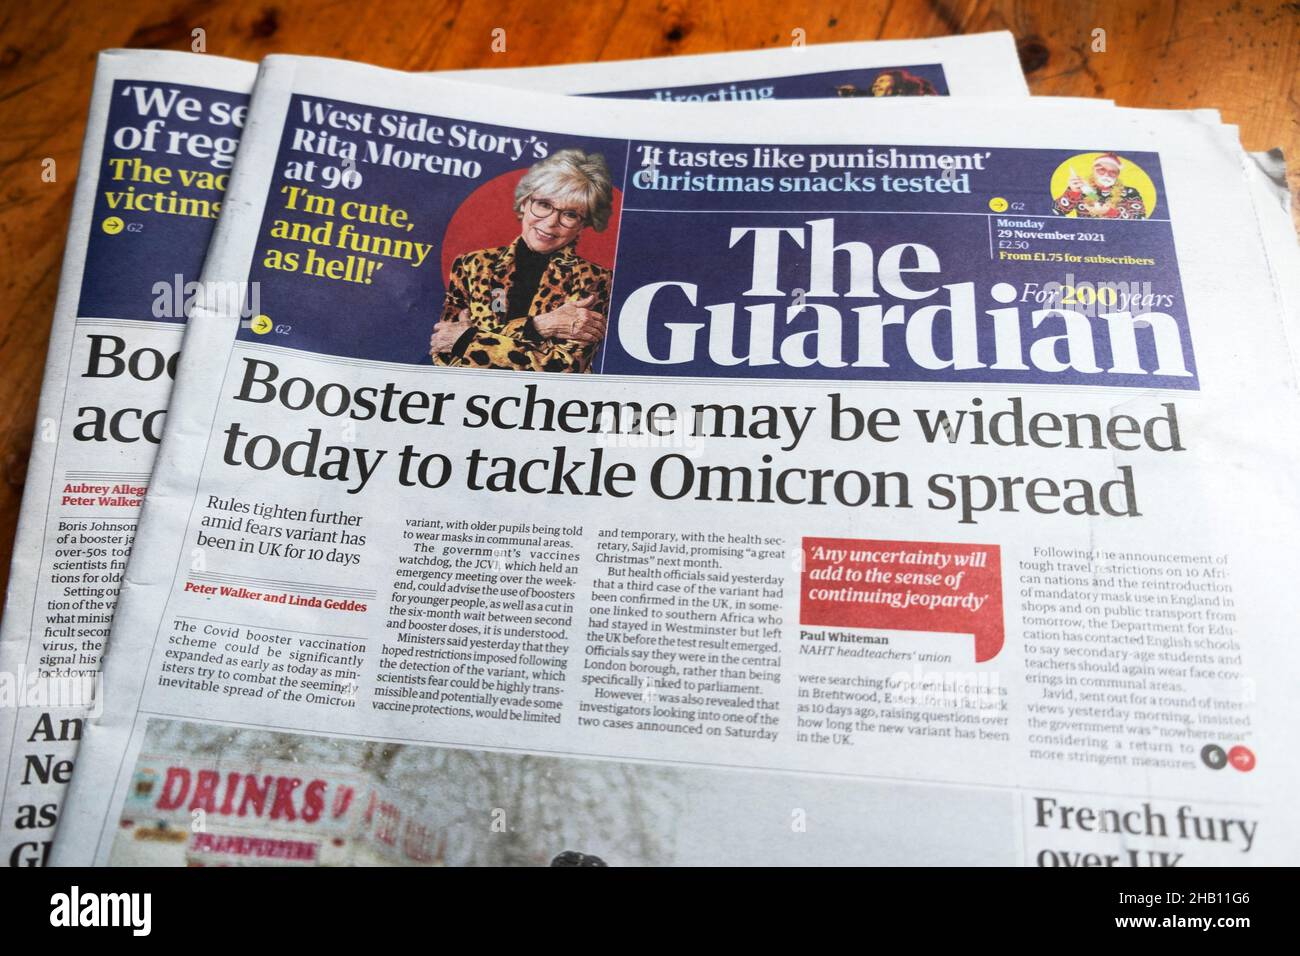 "Booster scheme may be widened today to tackle Omicron spread"  Guardian covid newspaper headline front page on 29 September 2021 in London England UK Stock Photo